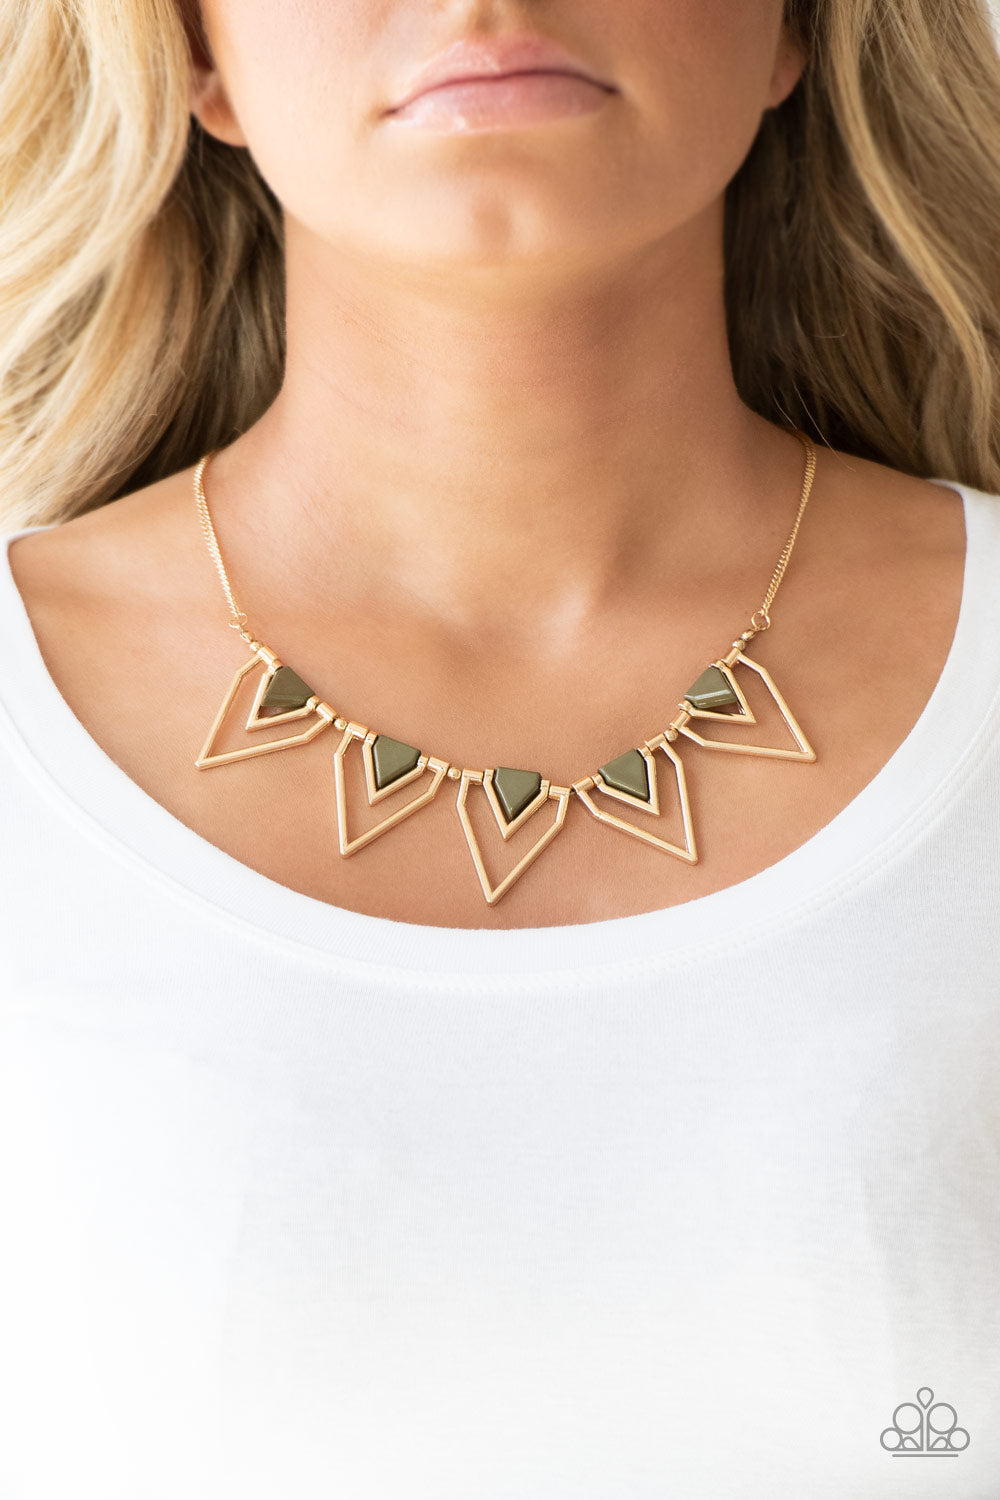 The Pack Leader Green Necklace - Paparazzi Accessories